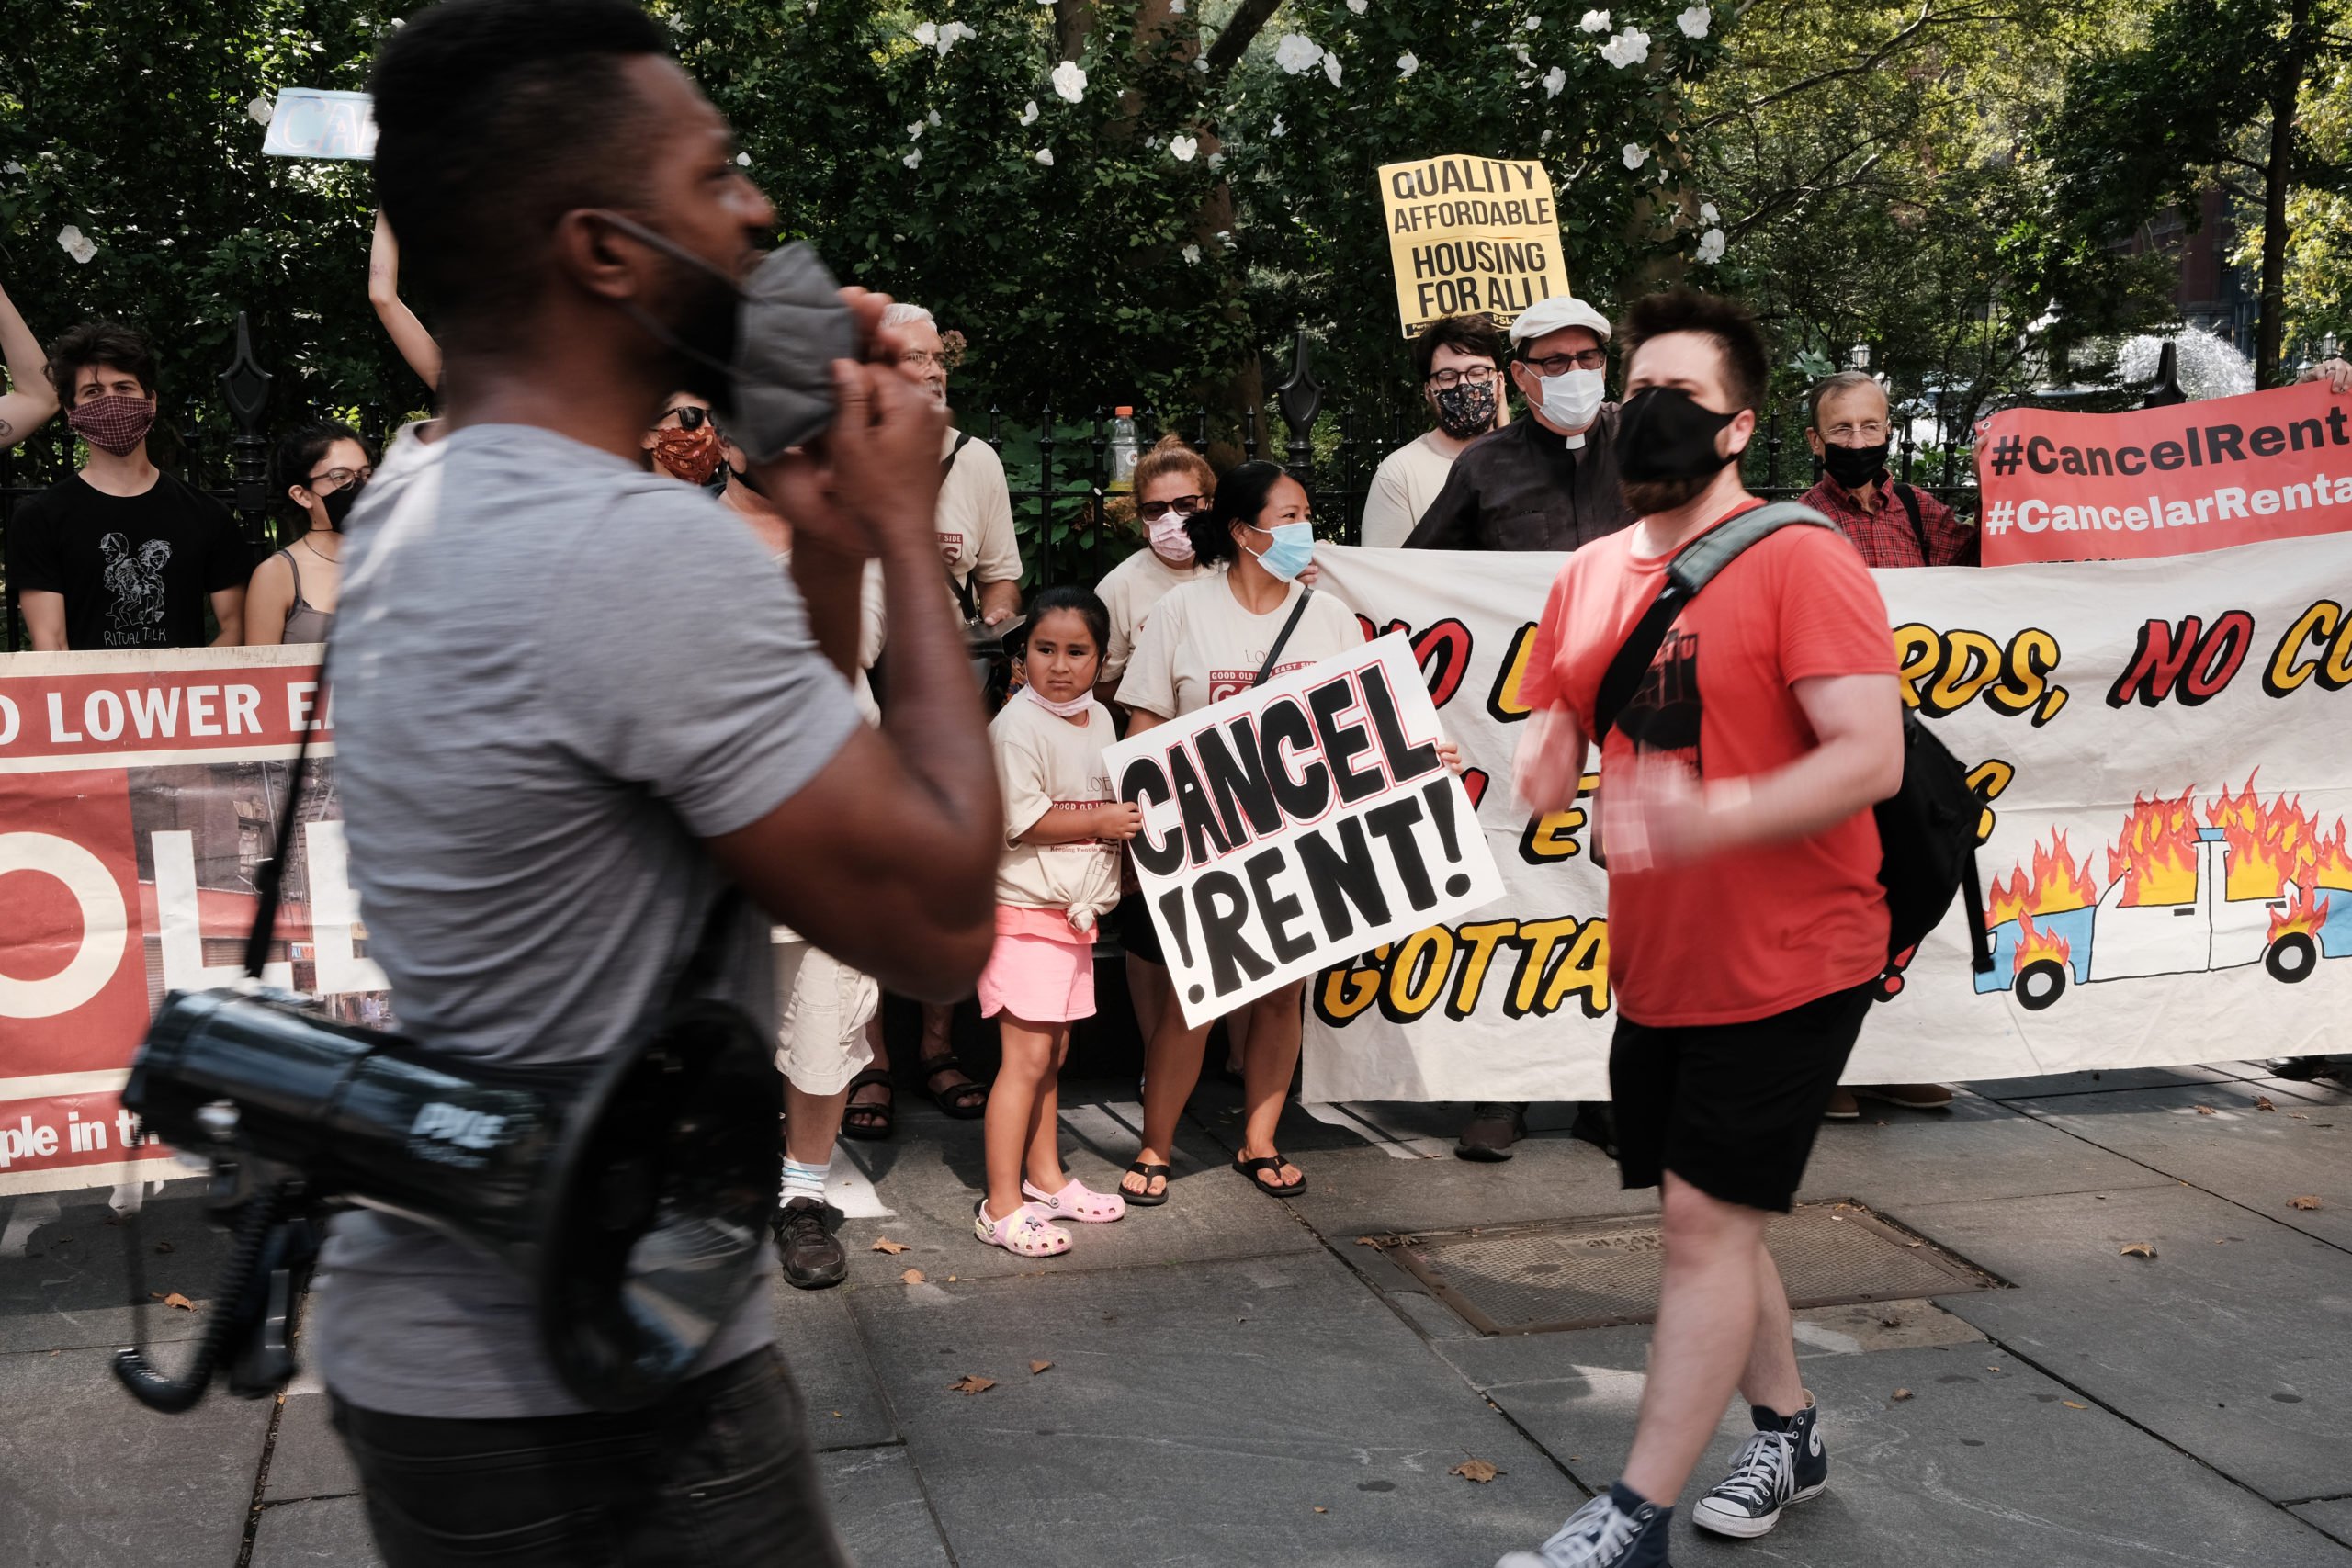 Activists hold a protest against evictions near on Aug. 11 in New York City. (Spencer Platt/Getty Images)